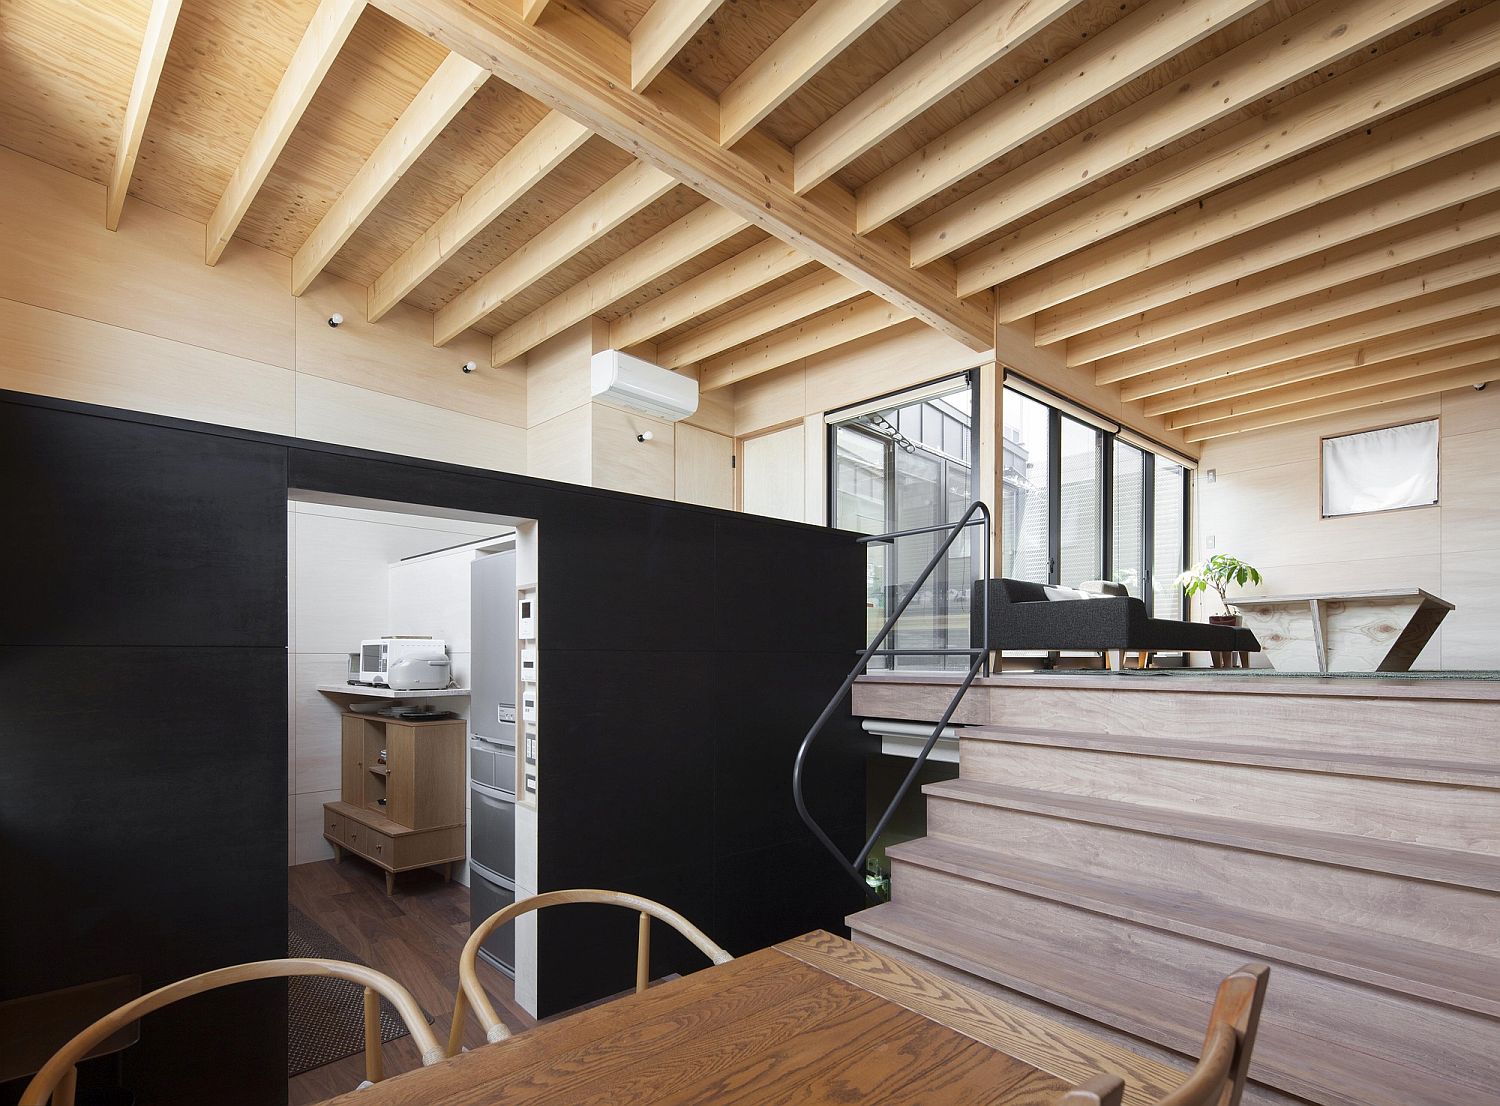 Space-savvy kitchen and dining area of the Japanese home